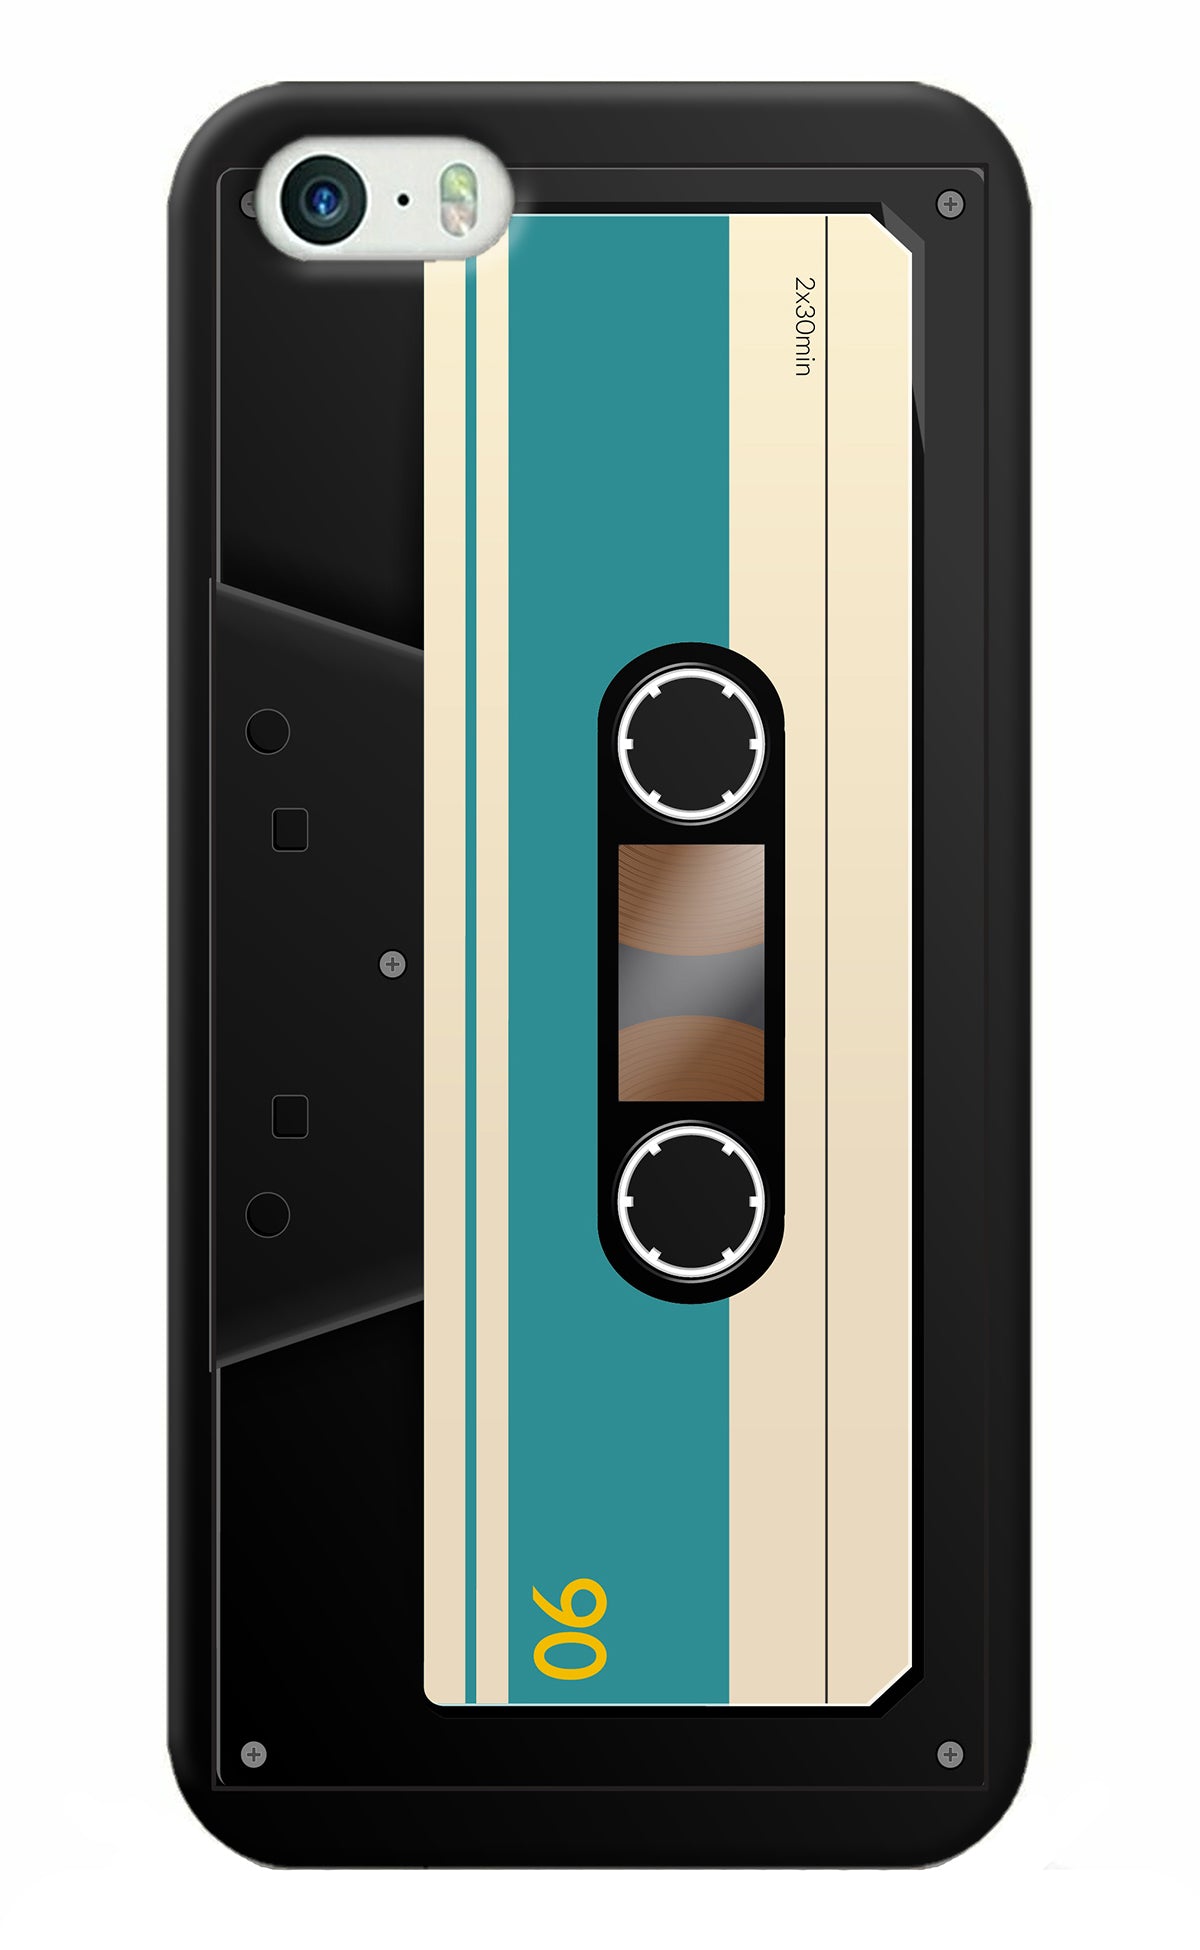 Cassette iPhone 5/5s Back Cover